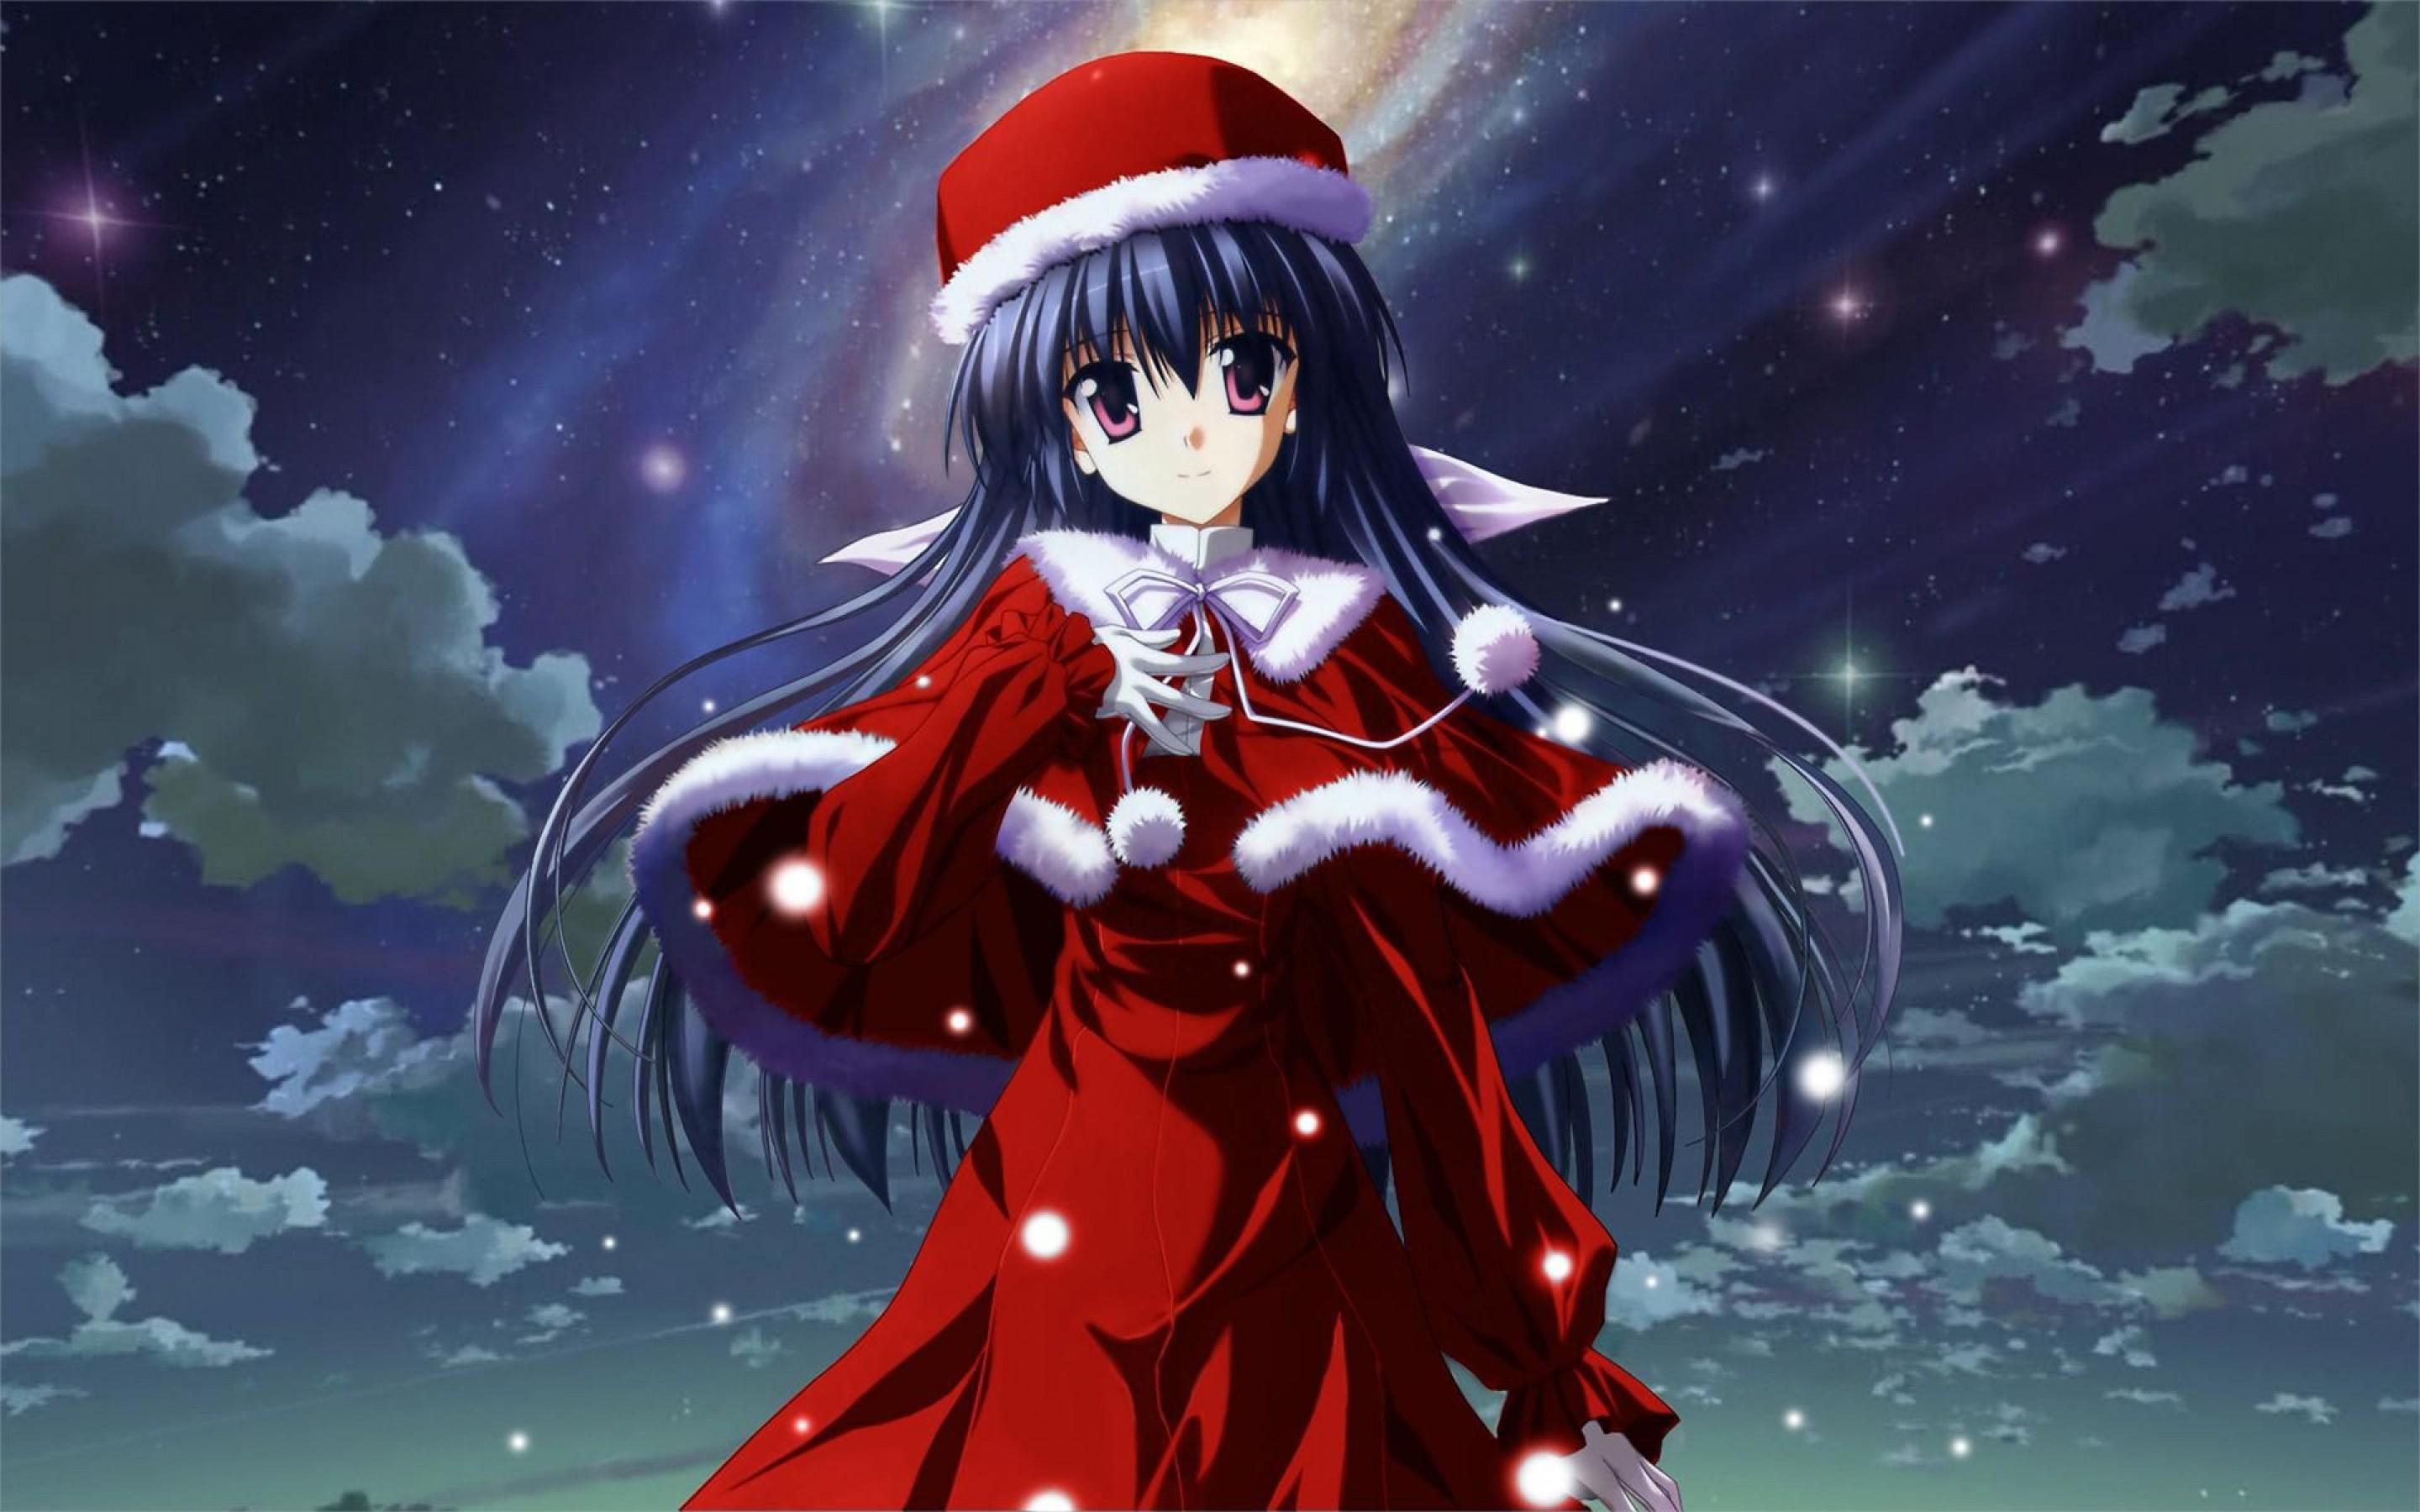 Anime Christmas Characters Wallpapers - Wallpaper Cave